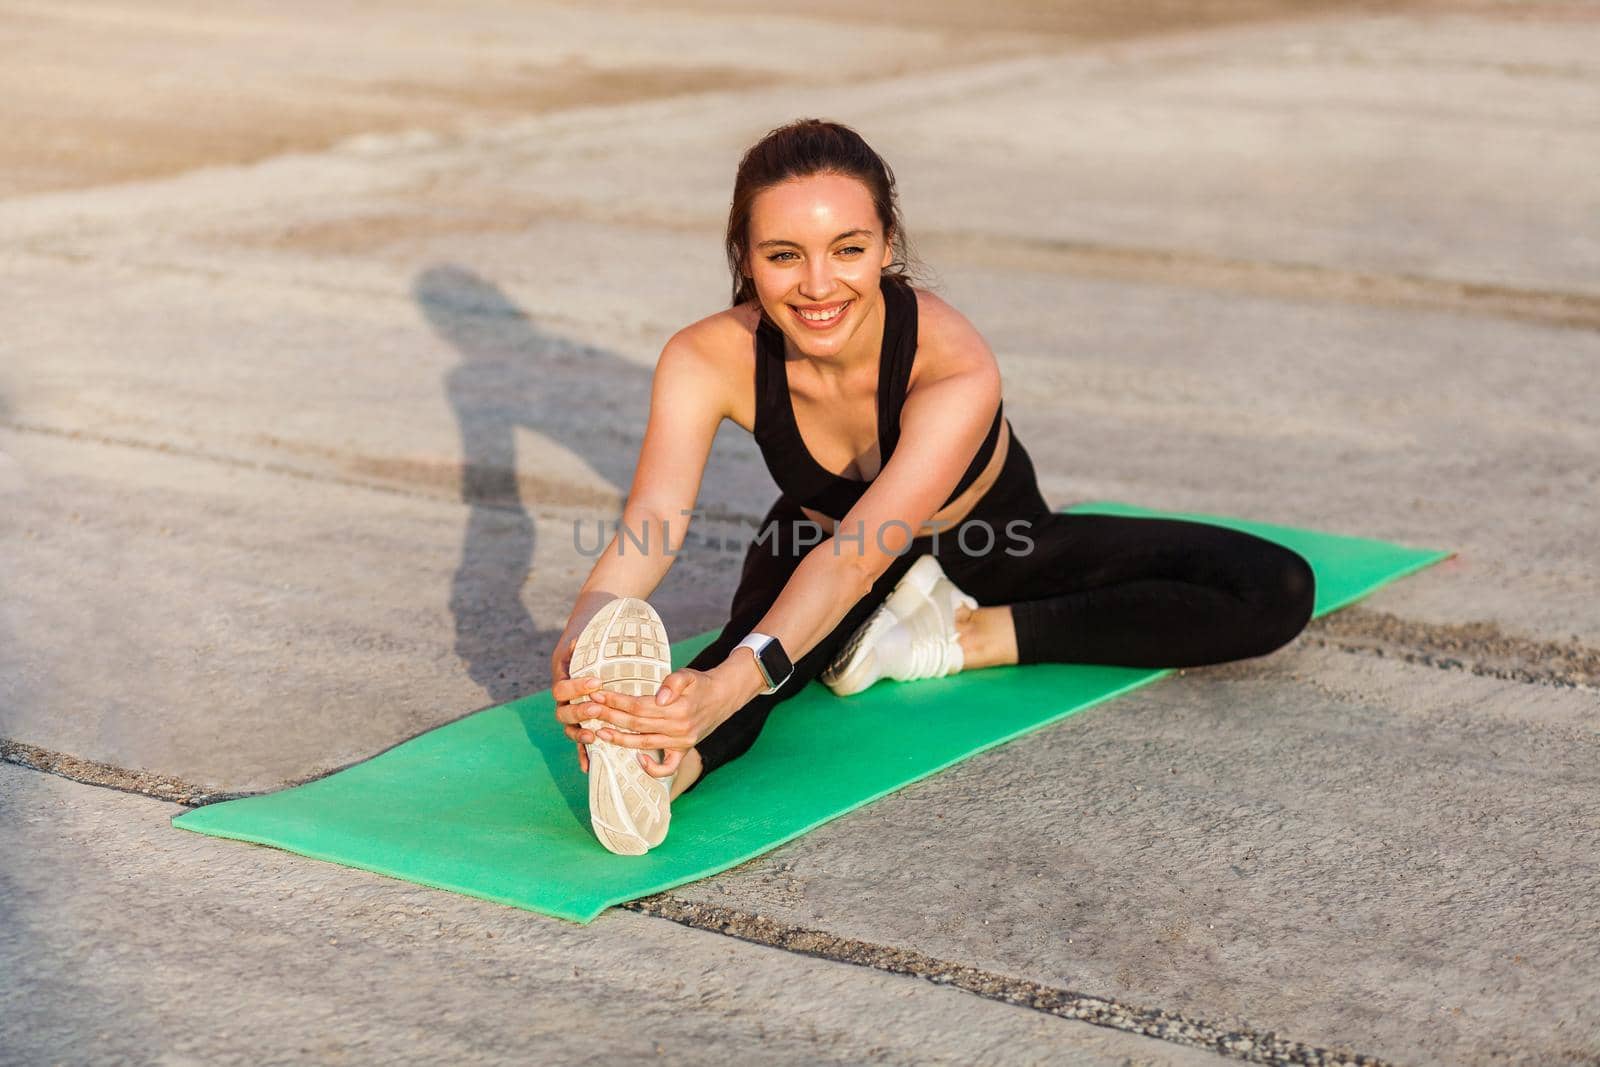 Cheerful smiling athletic woman in tight sportswear, black pants and top, practicing yoga, doing Head-to-Knee Pose, touching toes, stretching leg and back muscles. Health care, sport activity outdoor